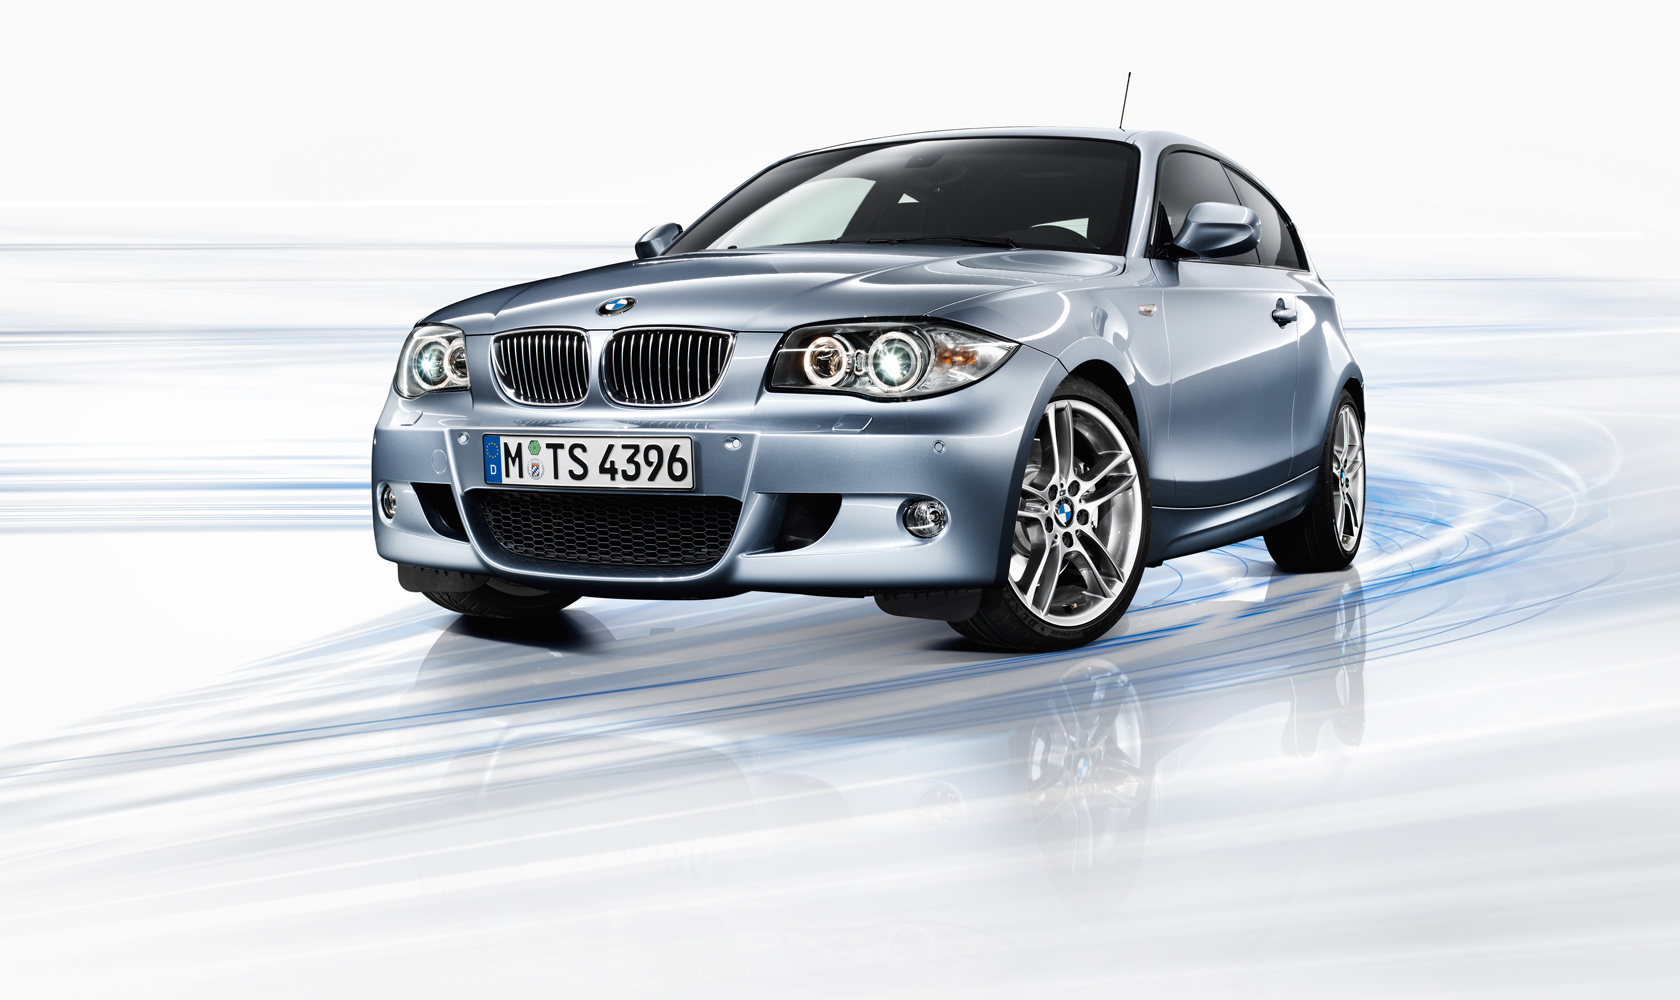 Lifestyle and Sport Editions of the BMW 1 Series three- and five-door